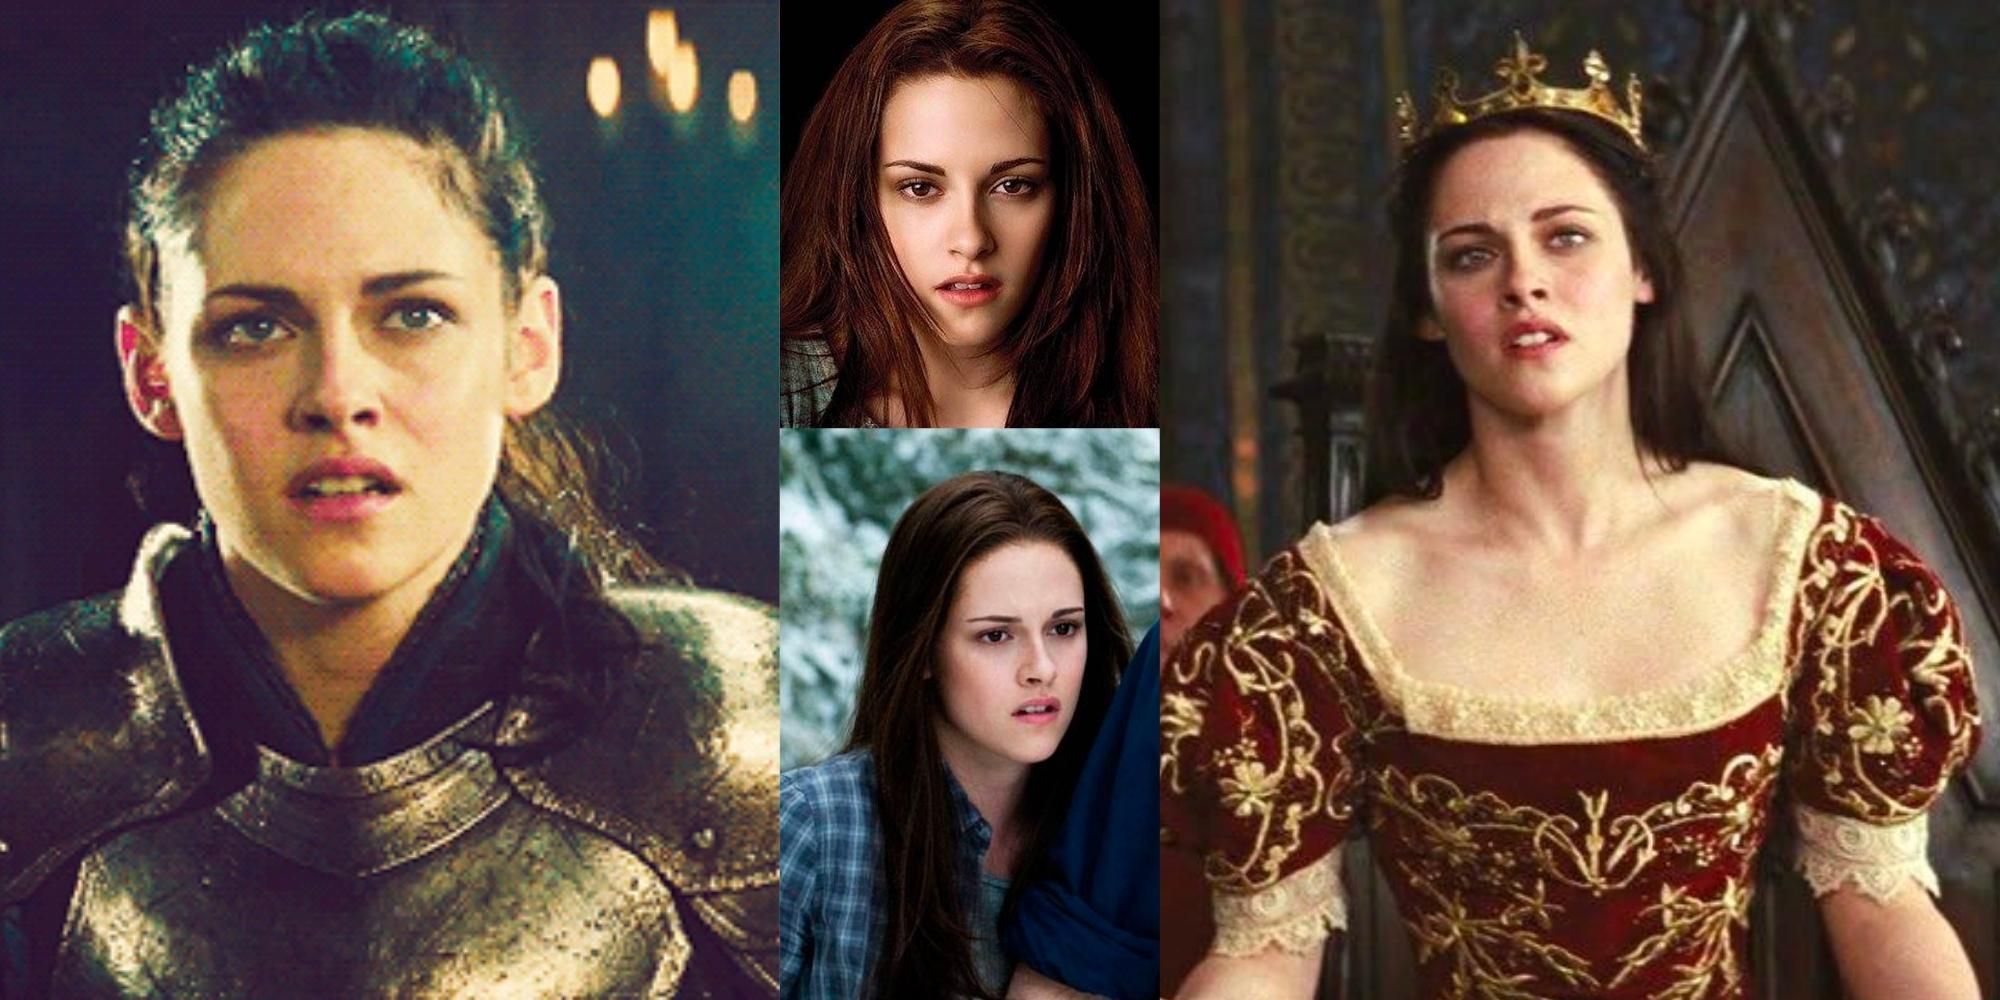 Kristen Stewart in various roles with the same stoic facial expression